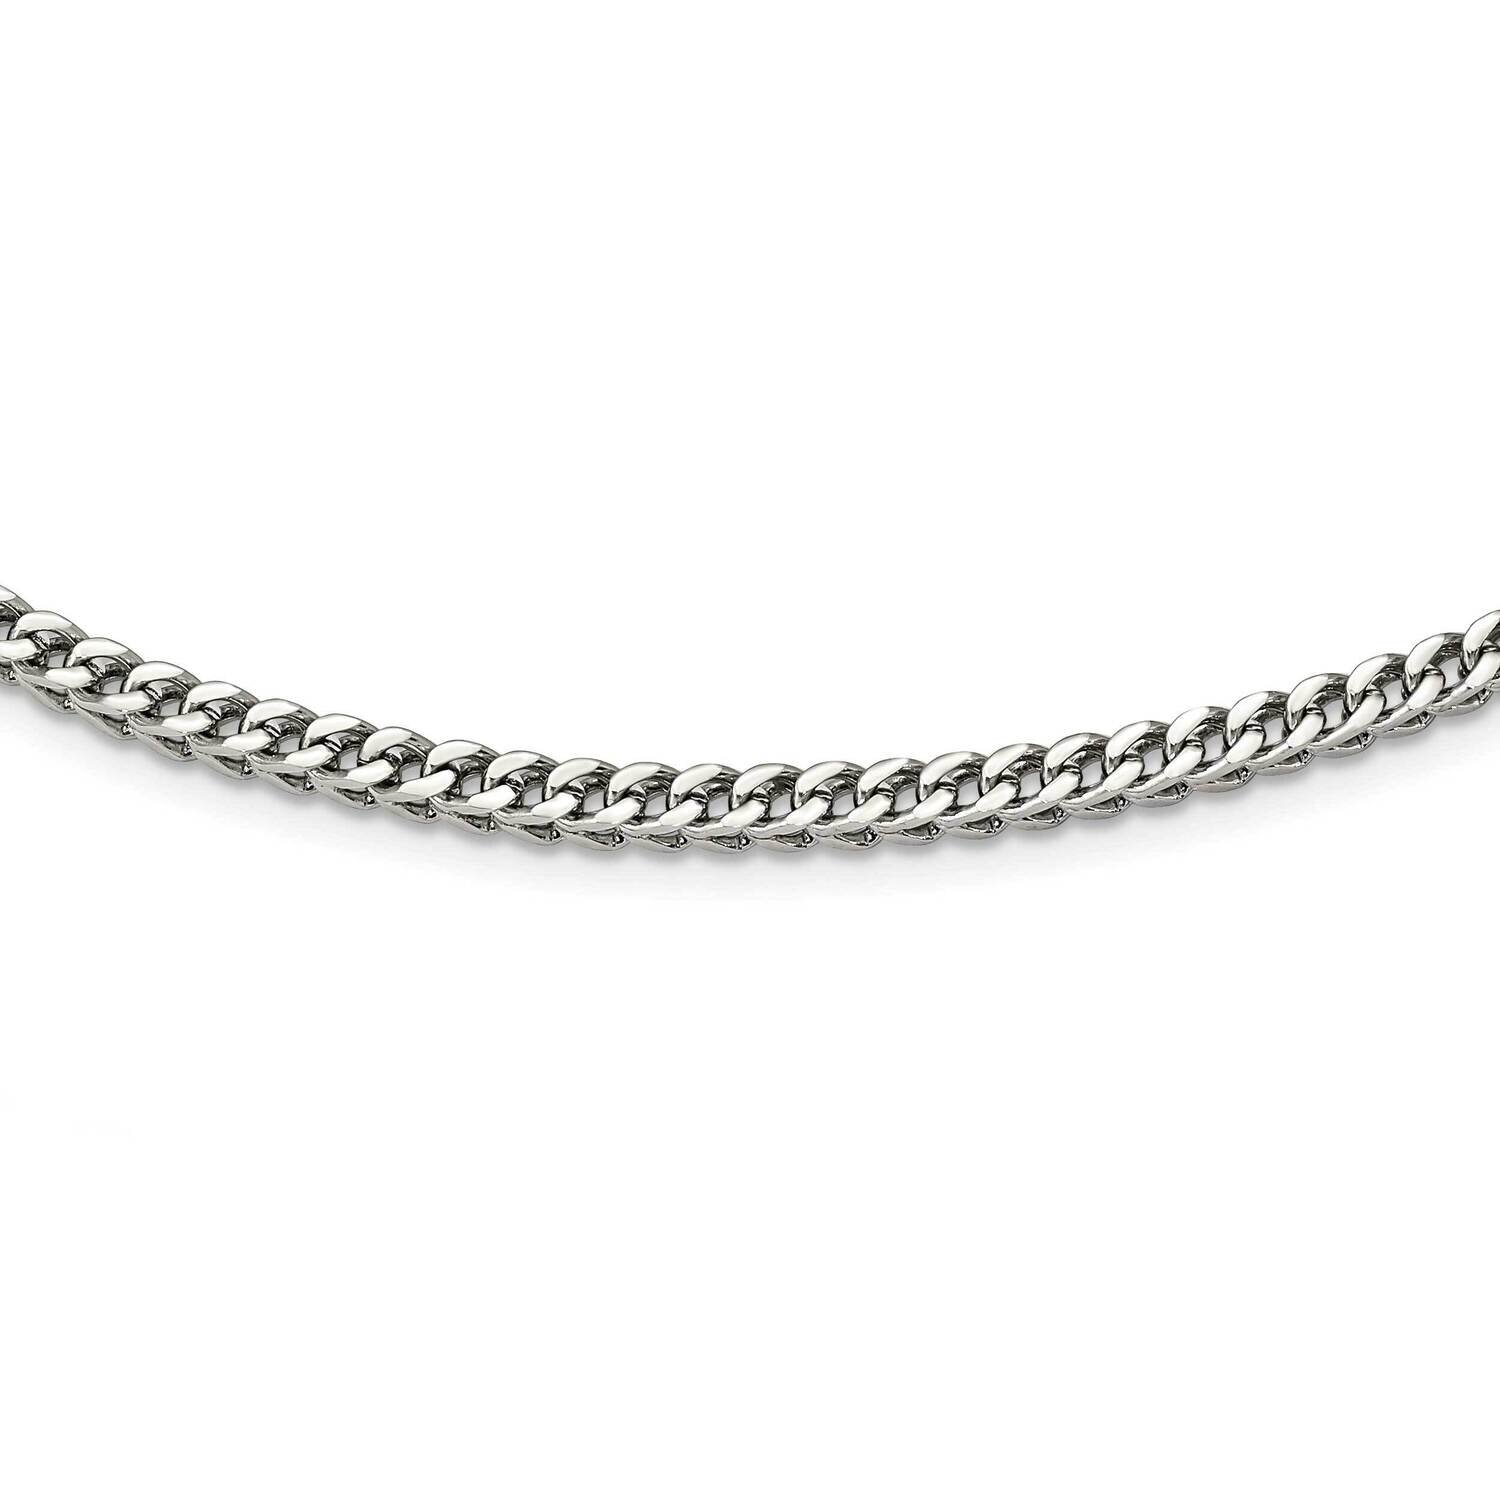 Franco 24 Inch Necklace Stainless Steel SRN824-24